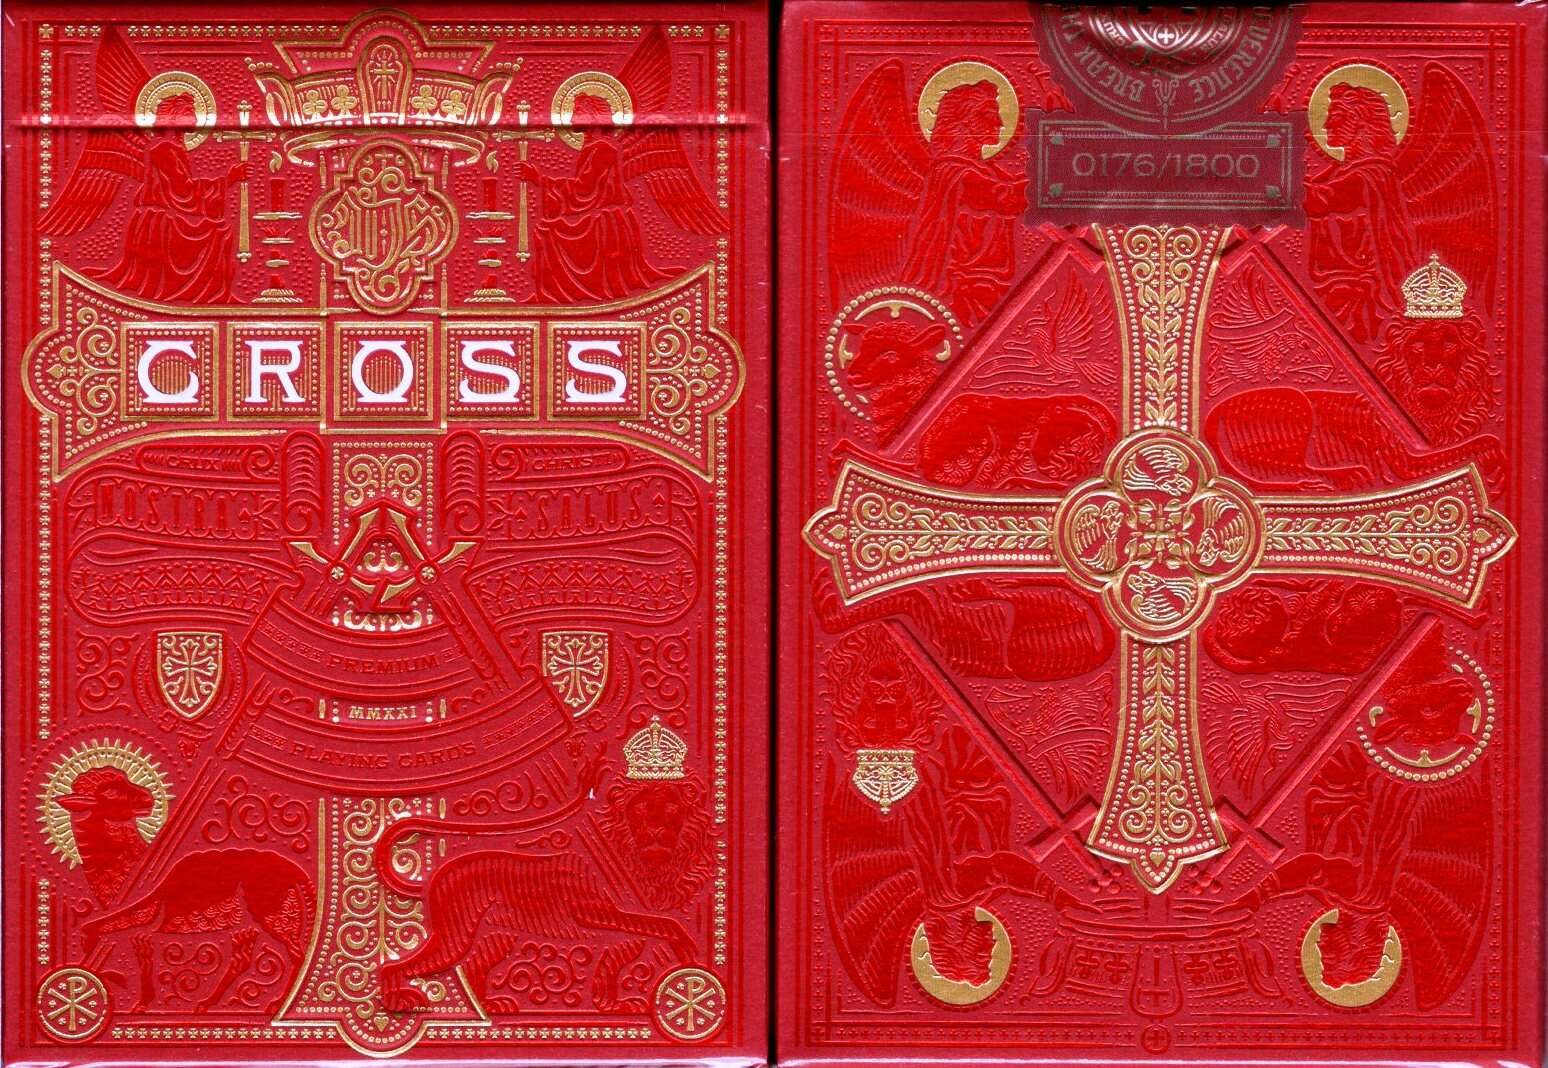 PlayingCardDecks.com-The Cross Playing Cards TPCC: Maroon Martyrs - Red